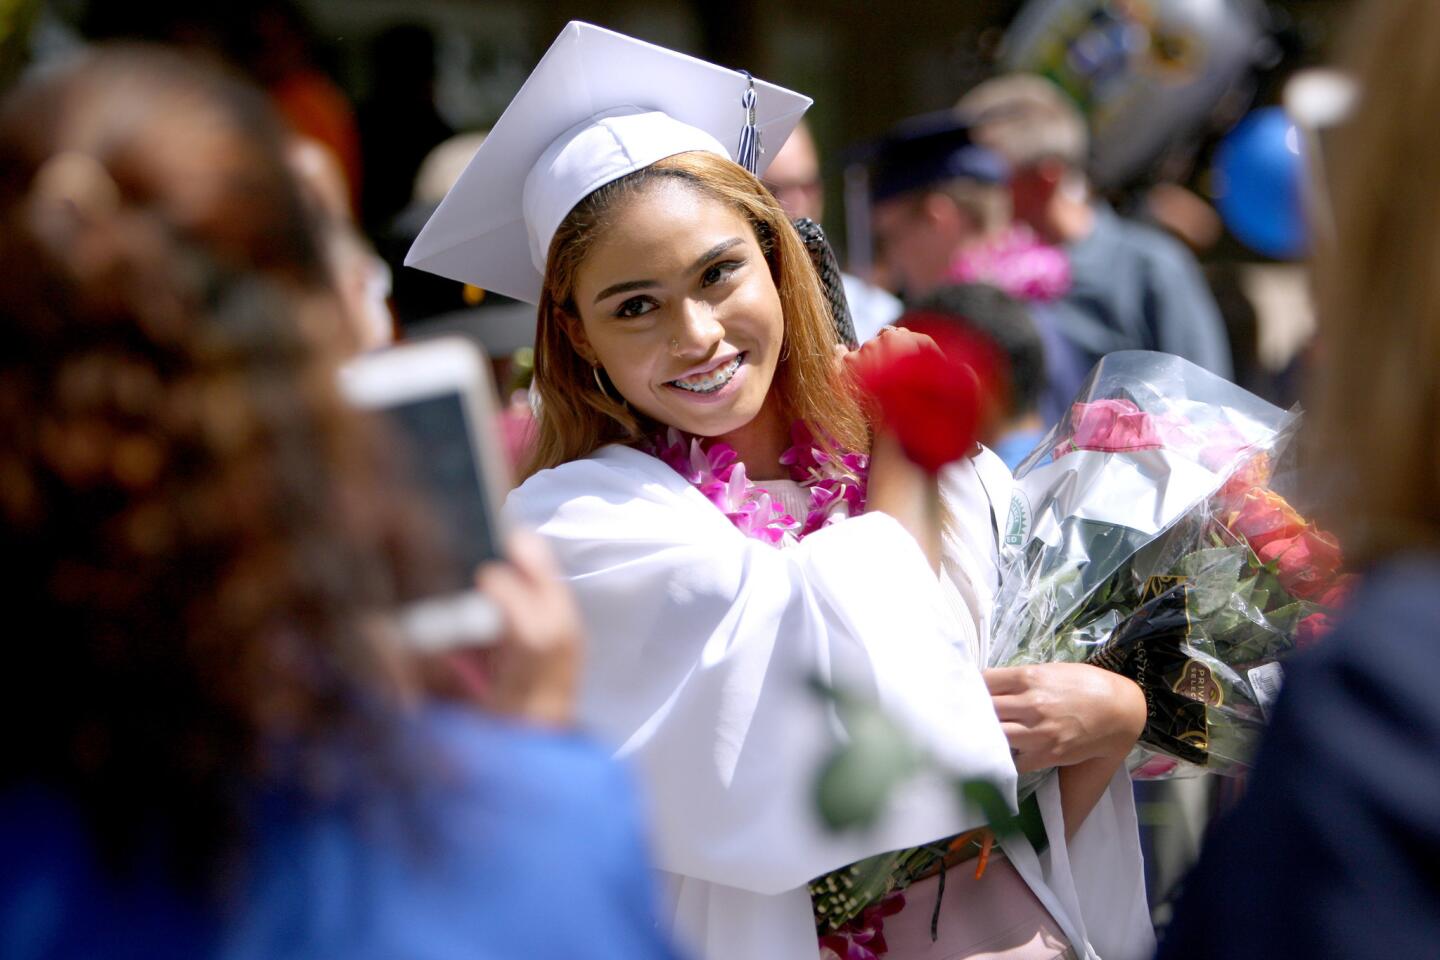 Family members take Daily High School graduate Mayah Pearson's photo after commencement exercises for DHS, Re-Connected Glendale and Verdugo Academy at First United Methodist Church in Glendale on Wednesday, June 1, 2016. About 70 students participated in the Glendale Unified School District ceremony.